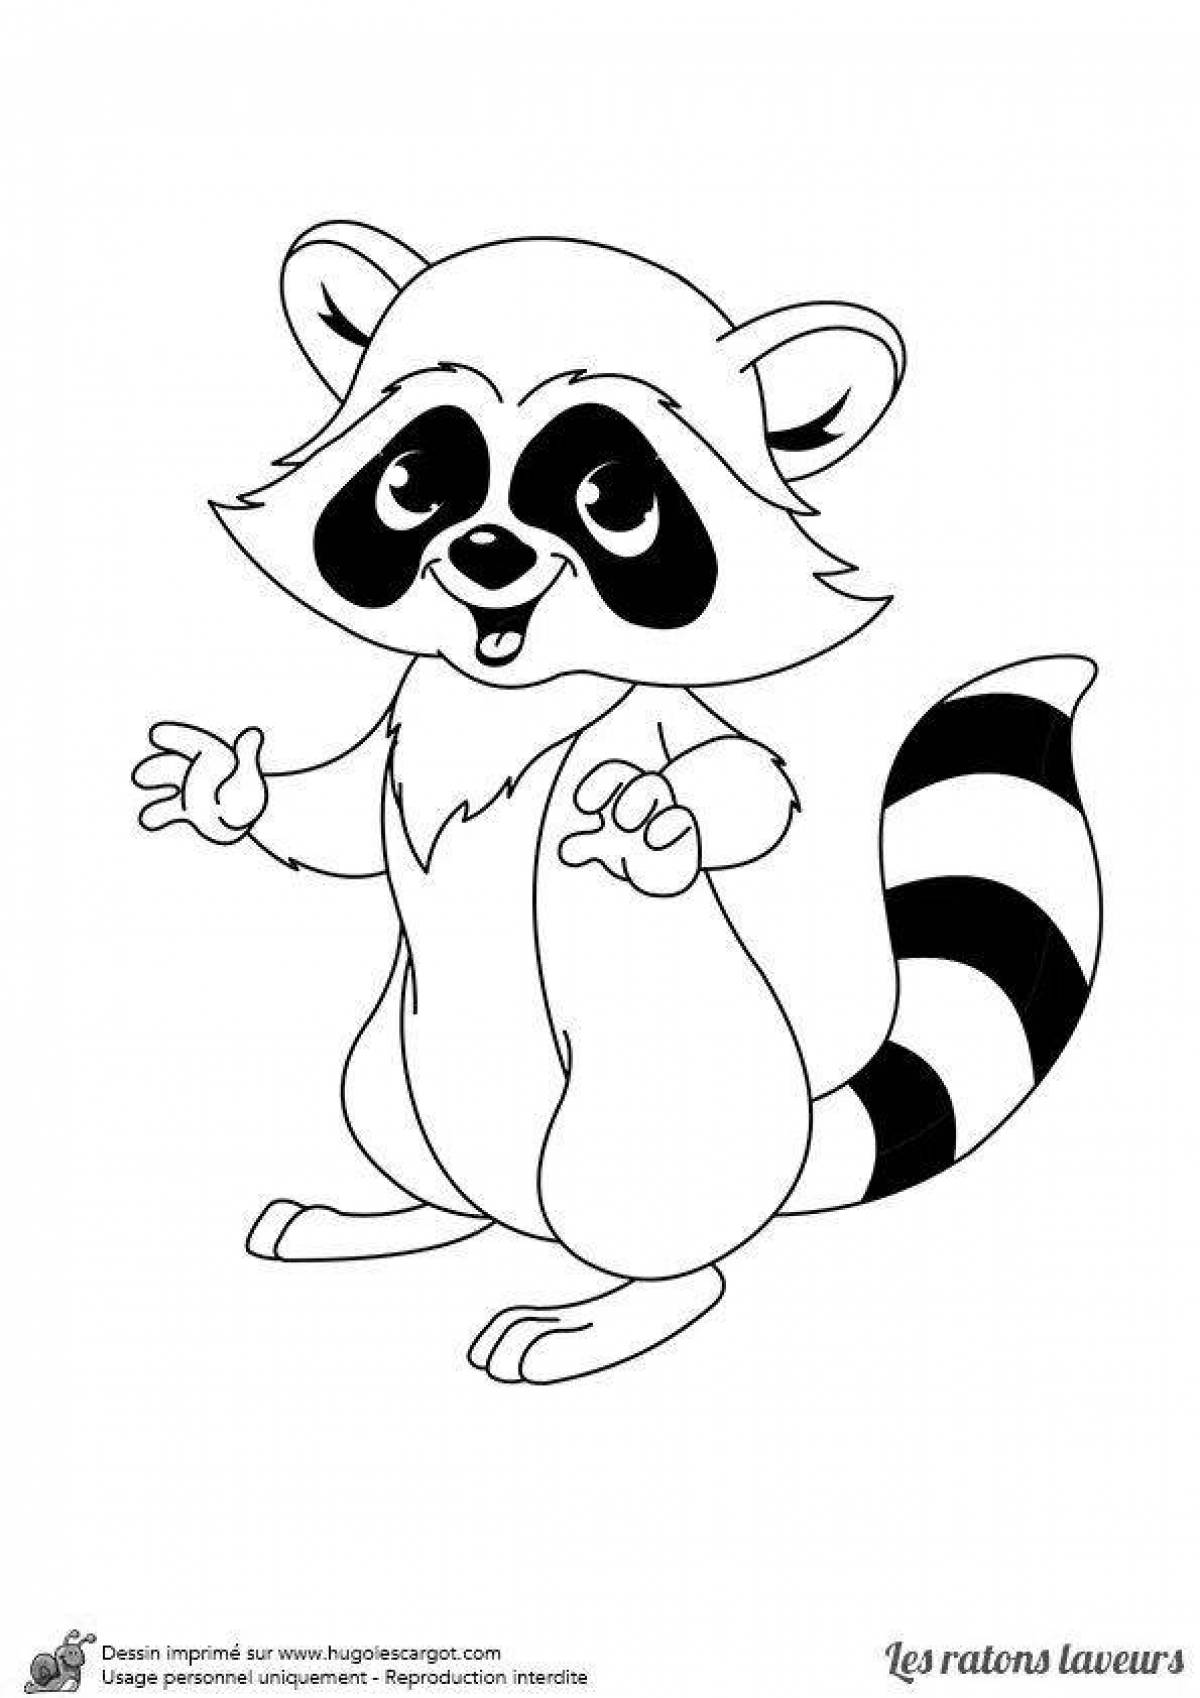 Coloring page funny raccoon